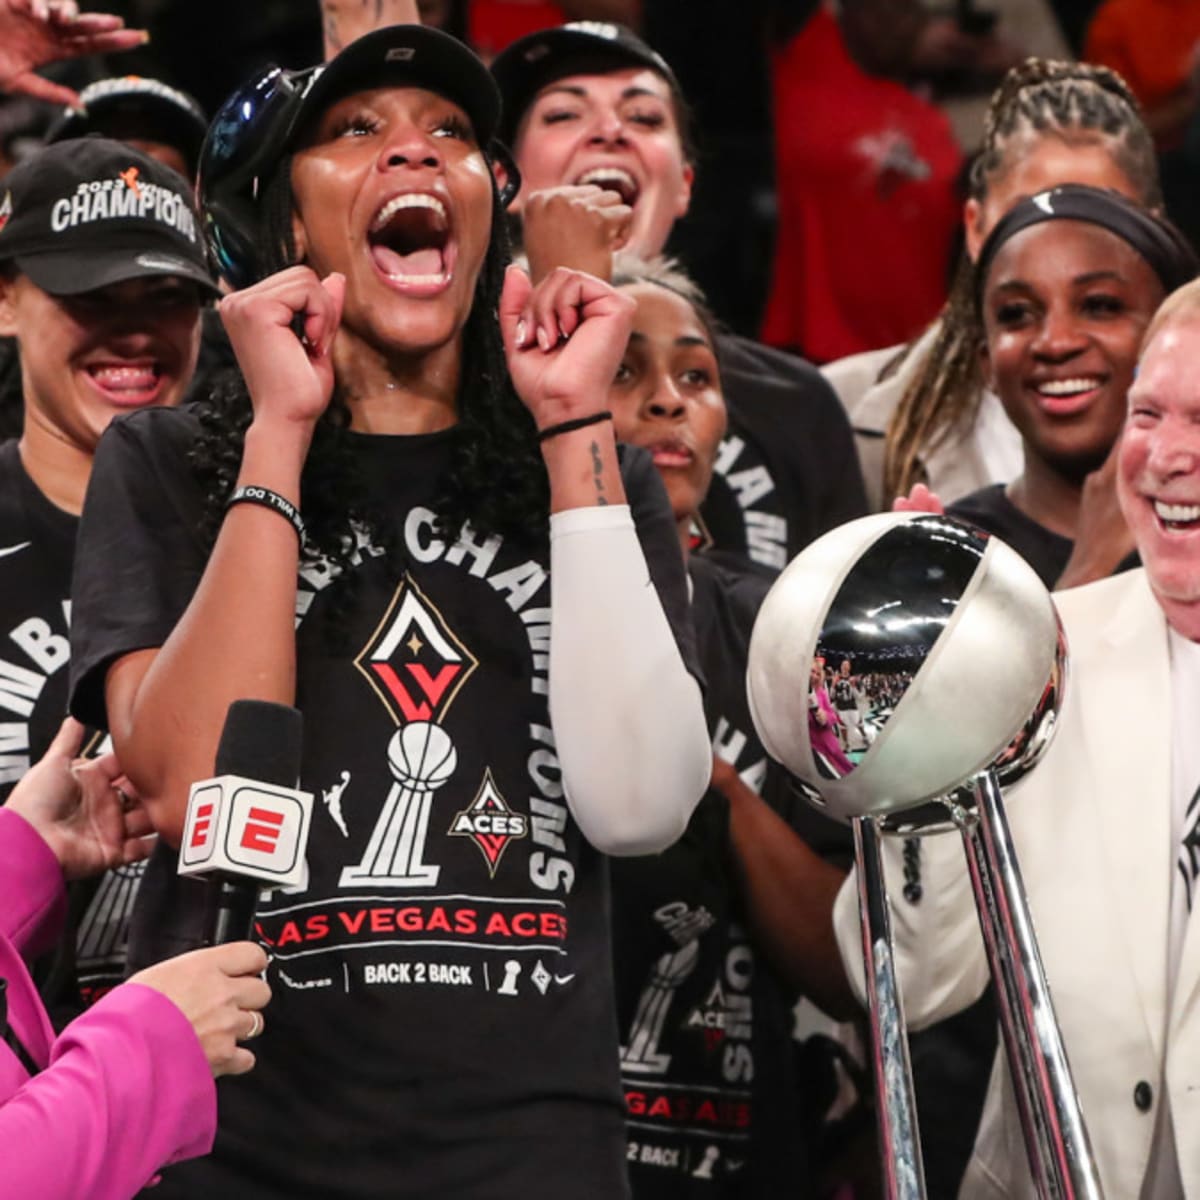 The Las Vegas Aces are the next great American sports dynasty